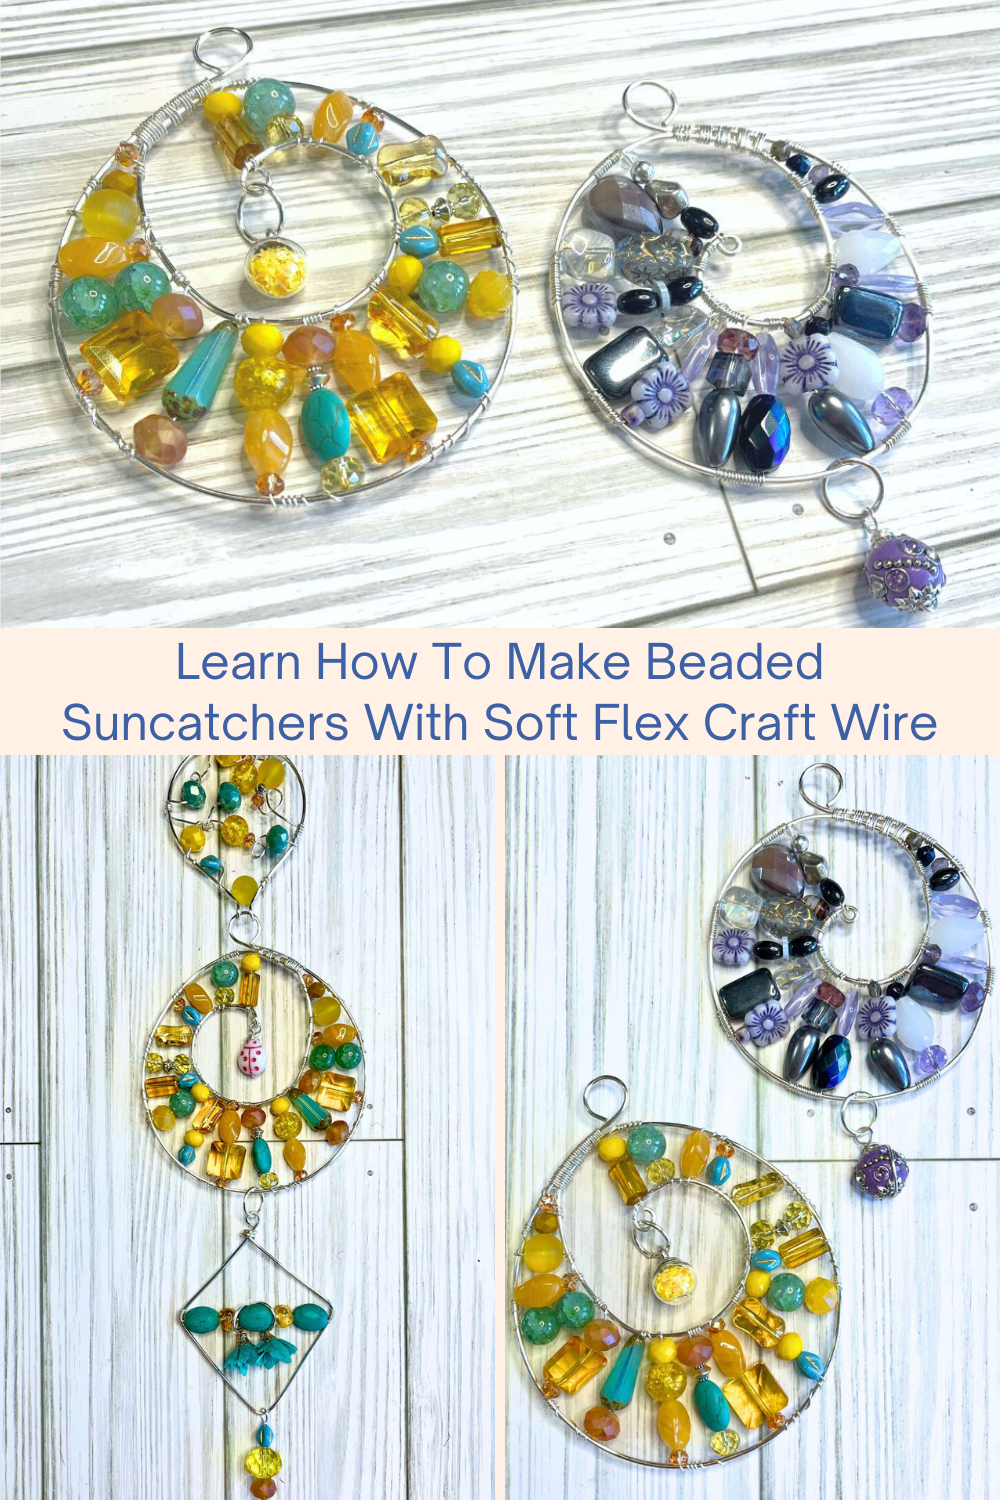 Learn How To Make Beaded Suncatchers With Soft Flex Craft Wire Collage